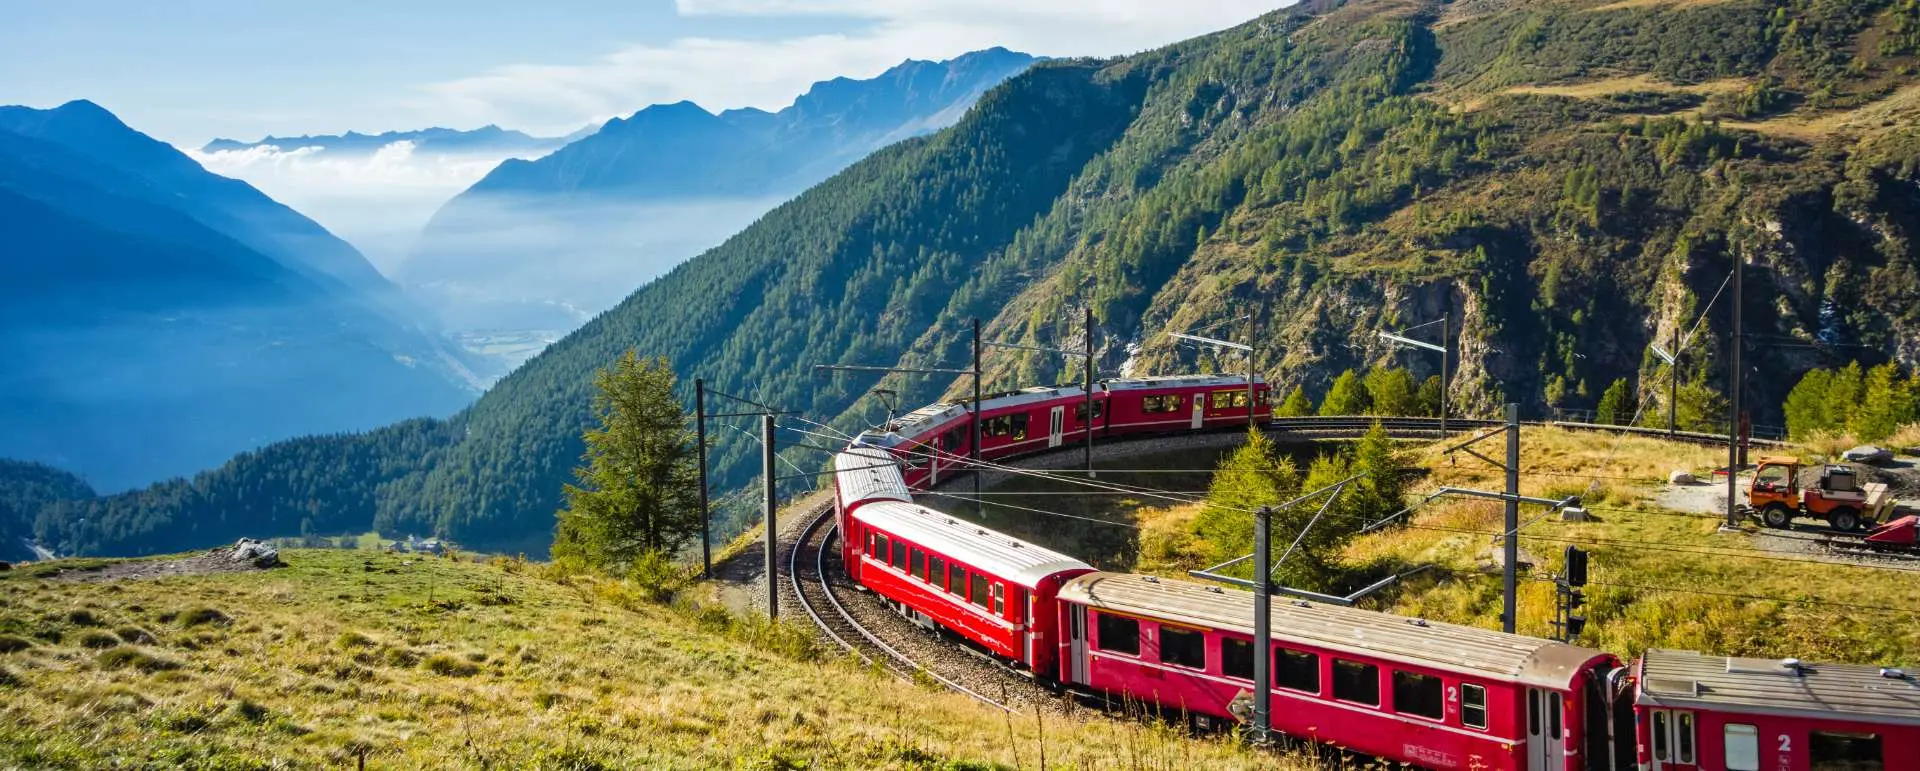 Poschiavo - Group travel for 20 persons accommodations